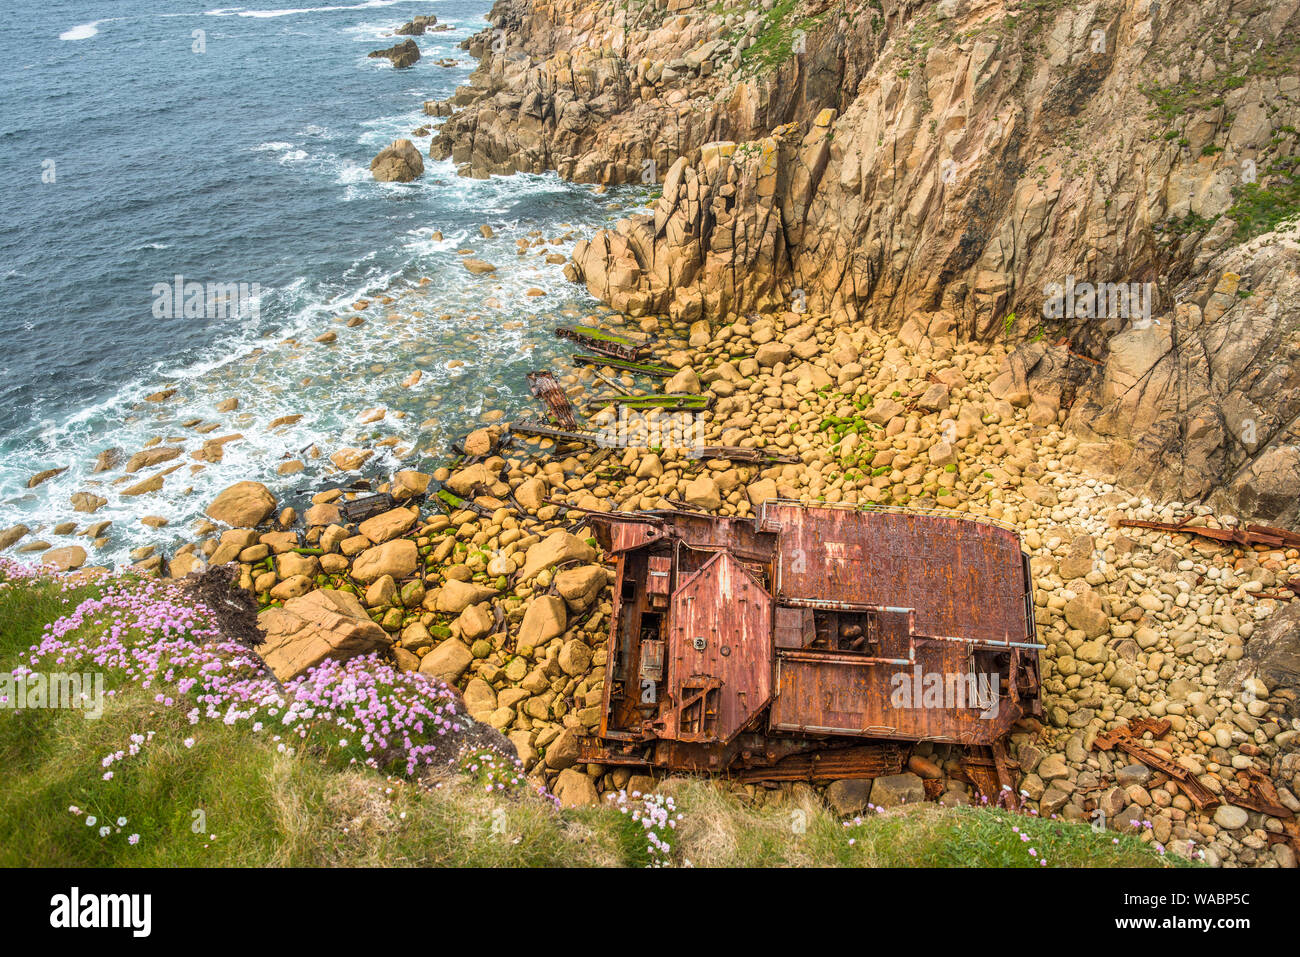 Wreckage of the shipwrecked ship the RMS Mulheim at the base of the cliffs at Castle Zawn near Land's End, Cornwall, England. UK. Stock Photo